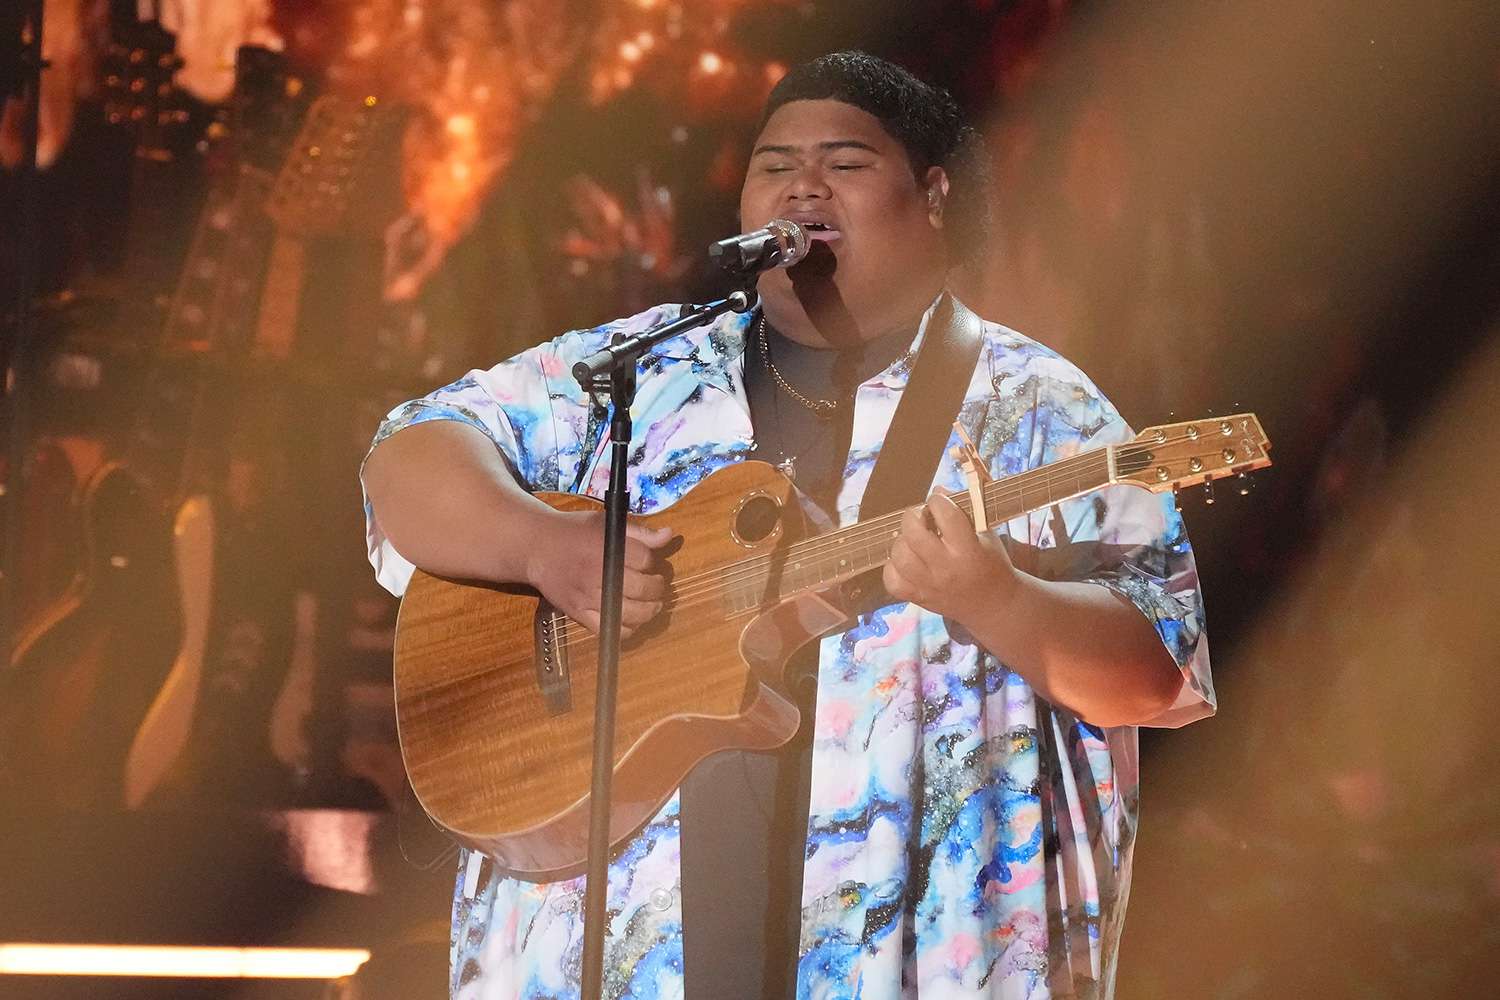 After a nail-biting three-hour finale, Iam Tongi is the newest American Idol!